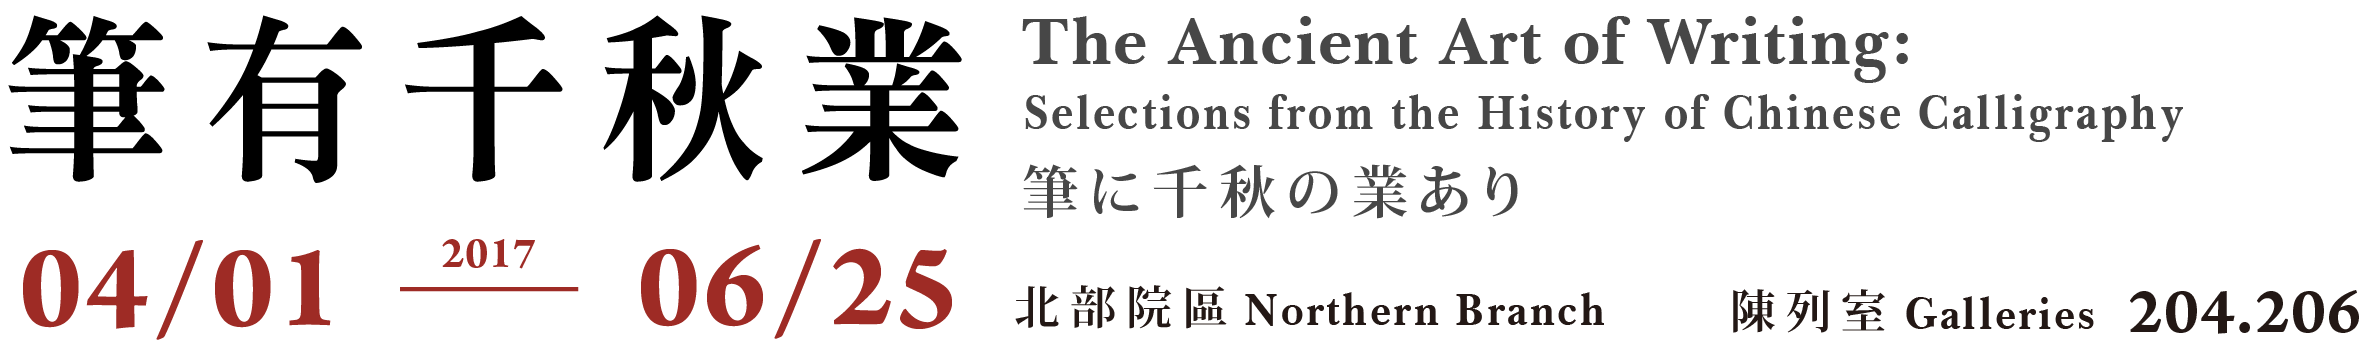 The Ancient Art of Writing: Selections from the History of Chinese Calligraphy，Period 2017/04/01 to 2017/06/25，Northern Branch Gallery 204、206